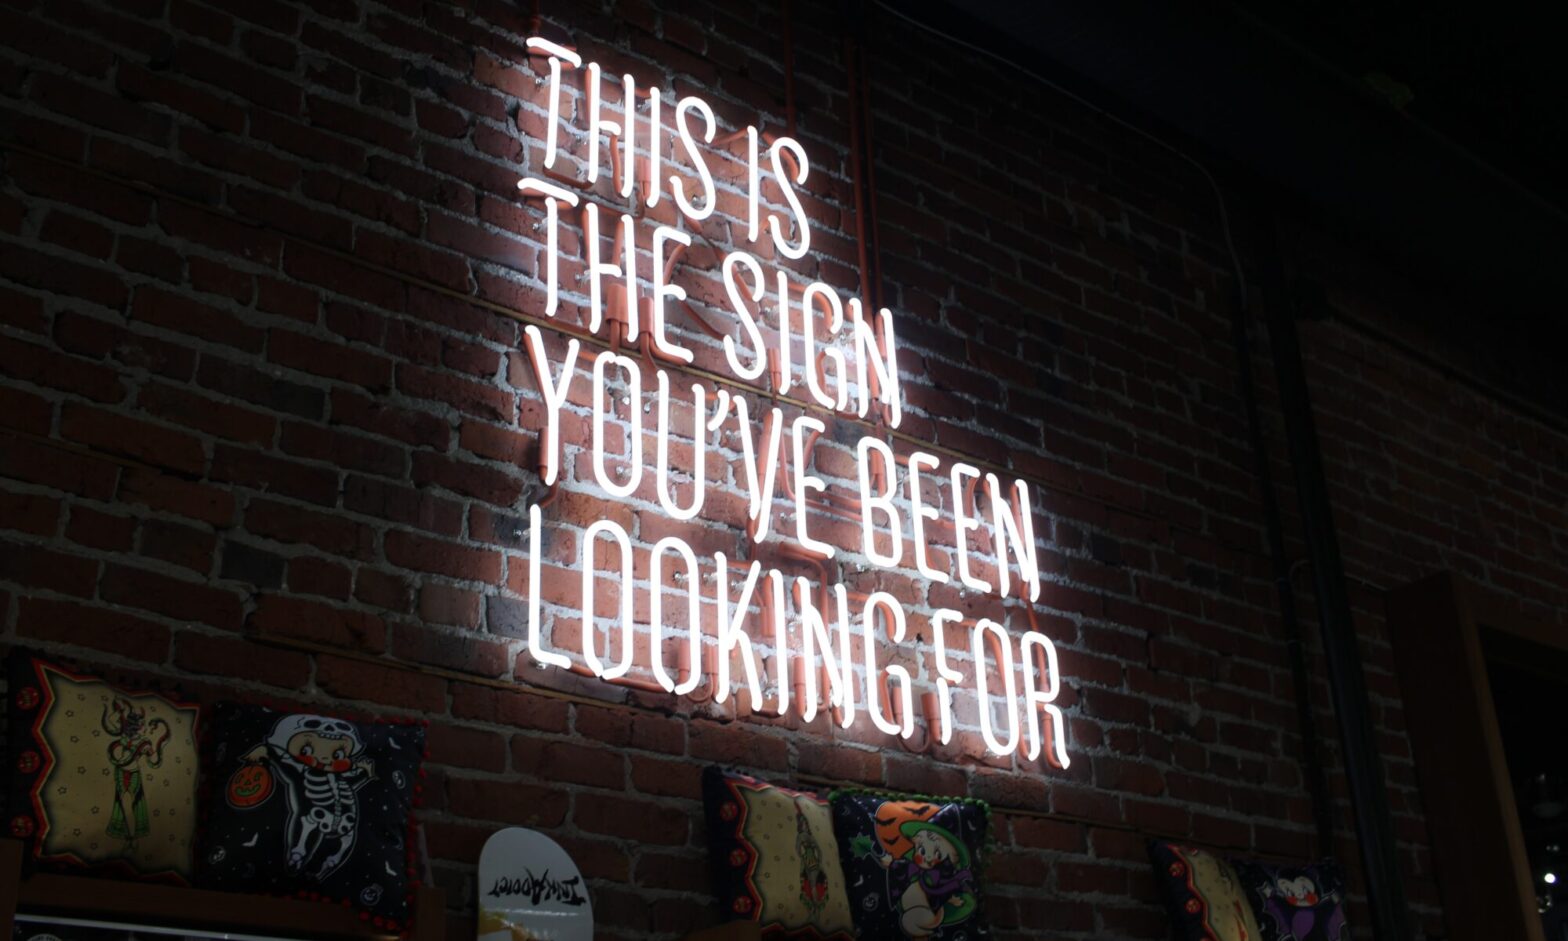 Sign showing "This is the sign you've been looking for" that you can apply for the Marketing Account Manager open position at Bright Pink Agency.